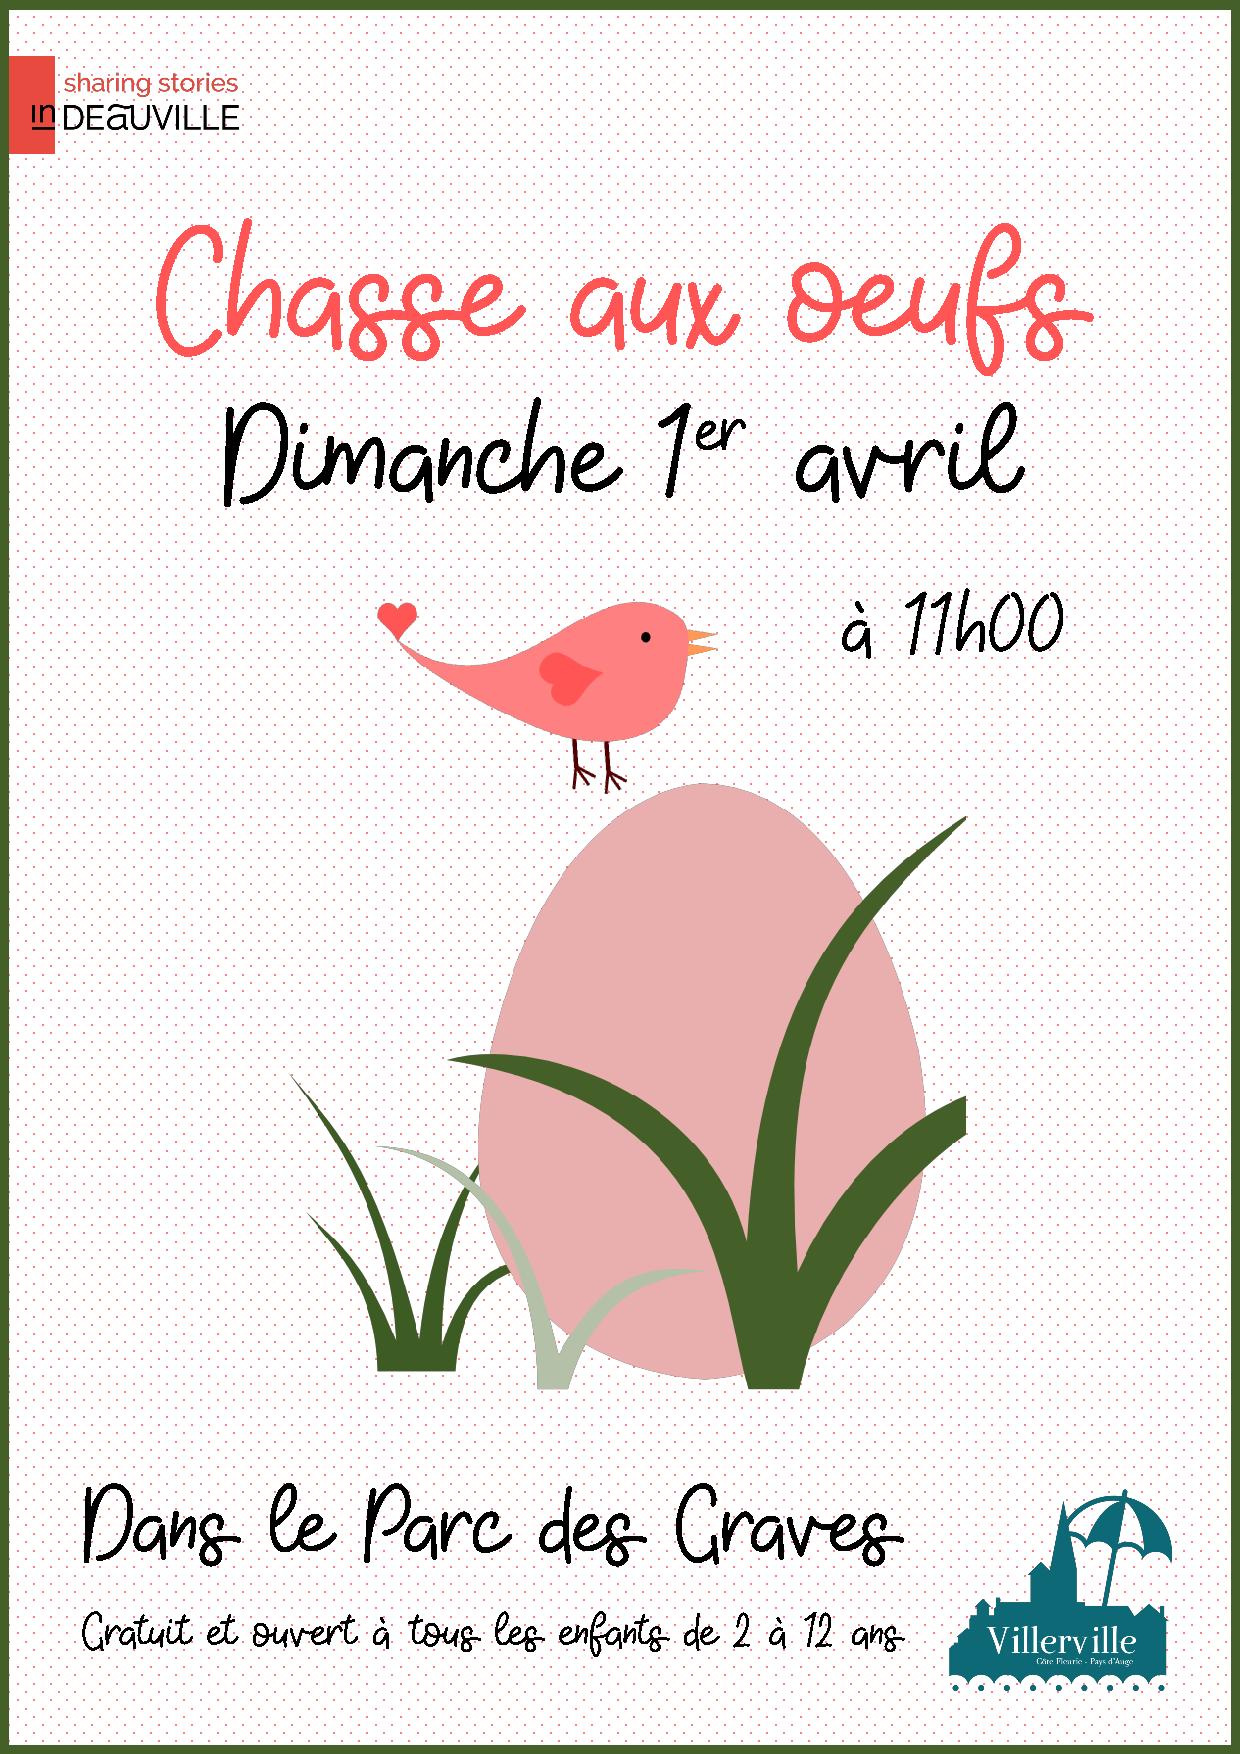 Affiche chasseauxoeufs2018 3 page 001